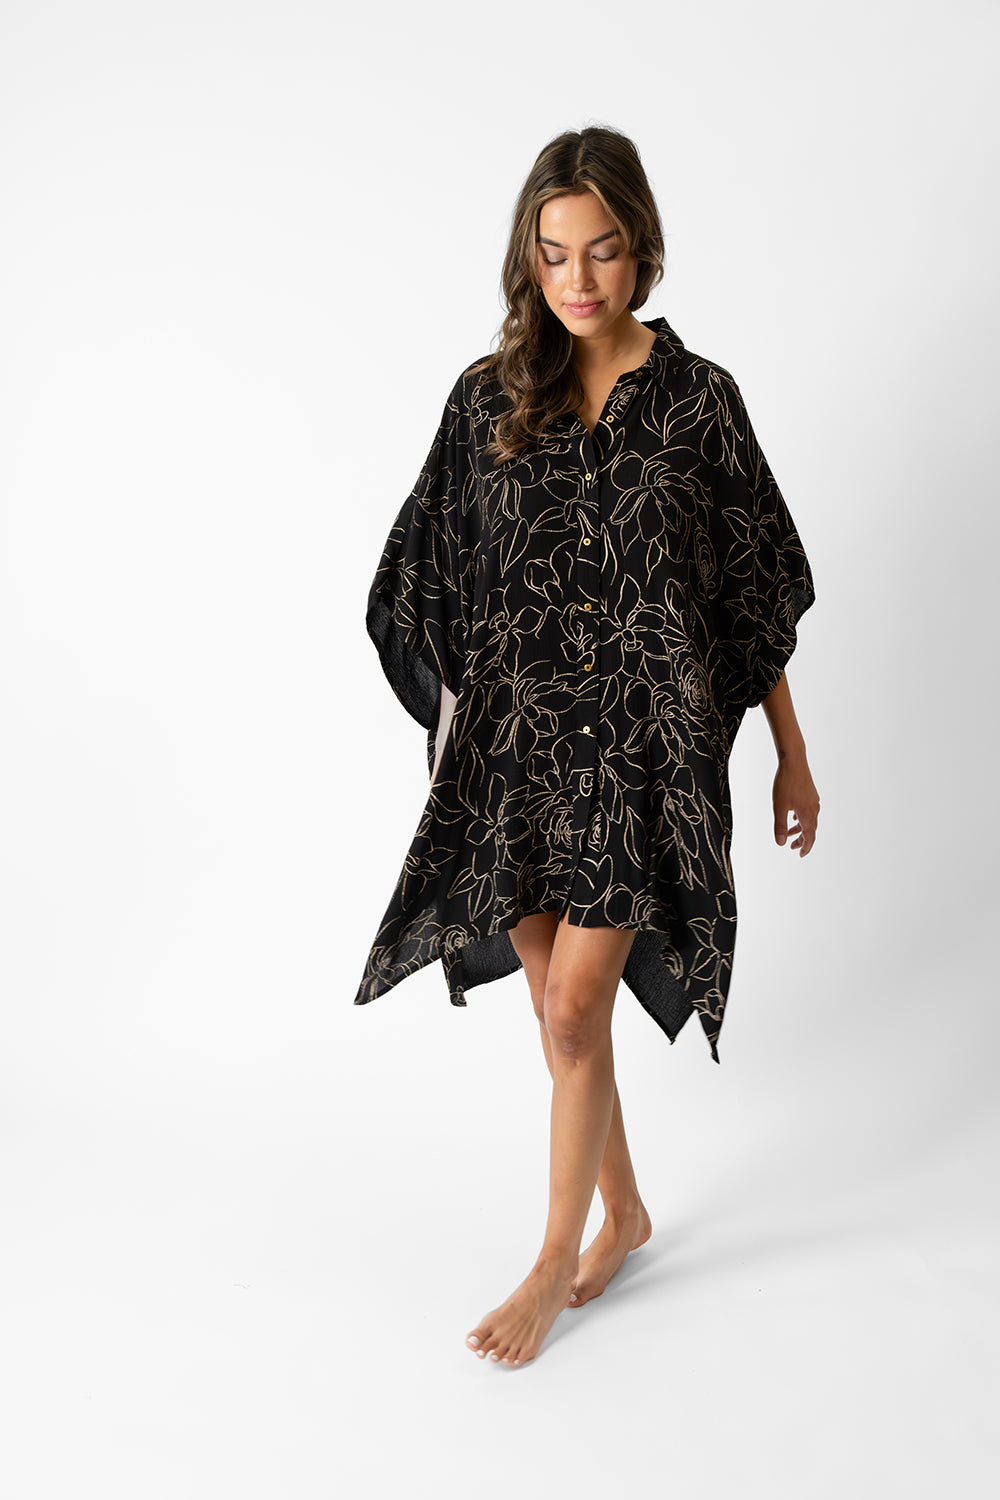 koy resort miami shine big shirt dress in midnight black featuring an abstract gold flower print for spring  2024 women's resort wear collection